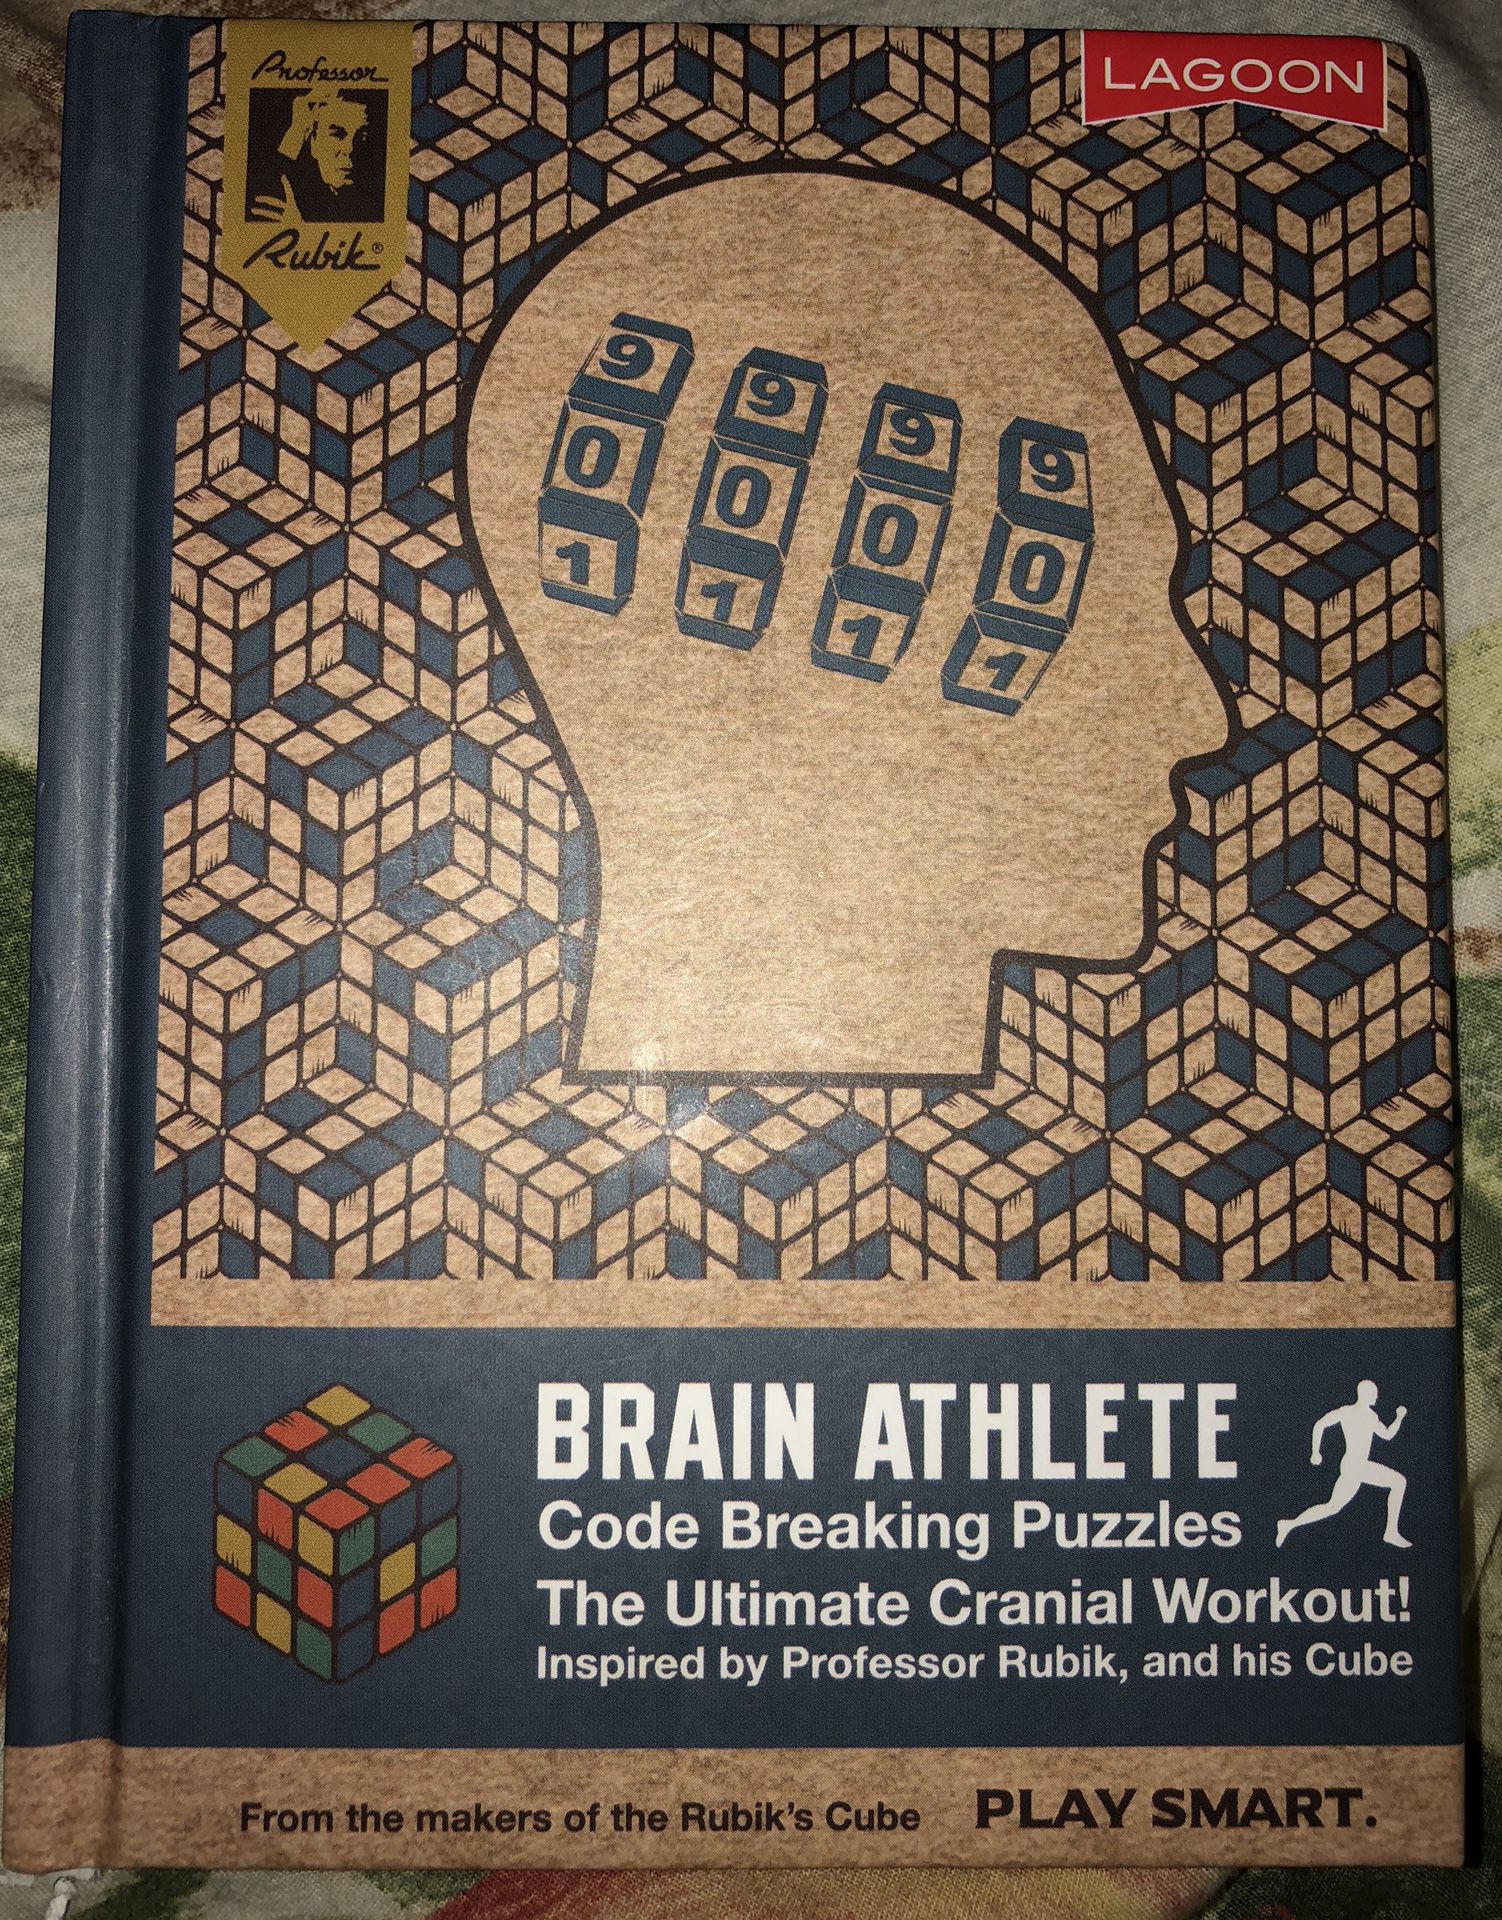 Brain Athlete Book made by Rubik’s Cube. Has games- code breaking puzzles - riddles to solve... Great secret Santa gift or stocking stuffer.